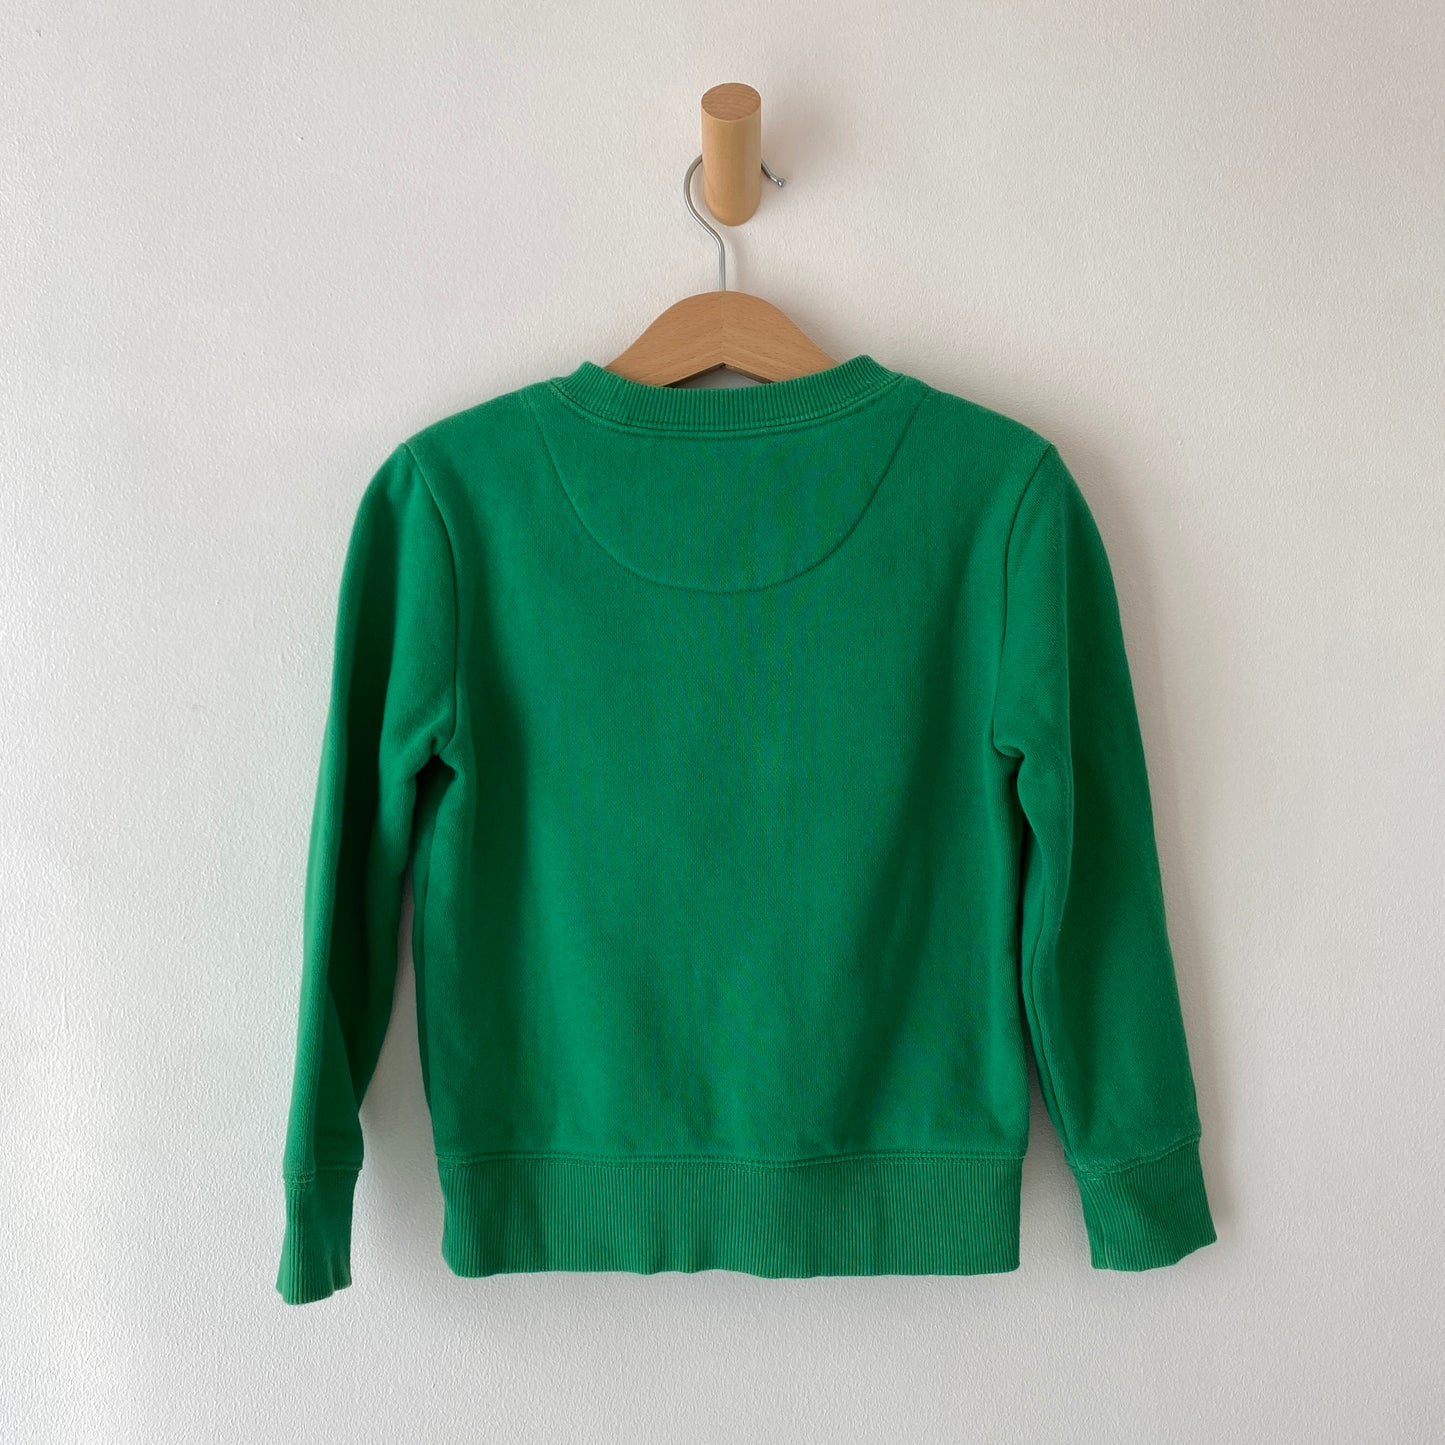 Toy Story Buzz Green Sweater (5-6)